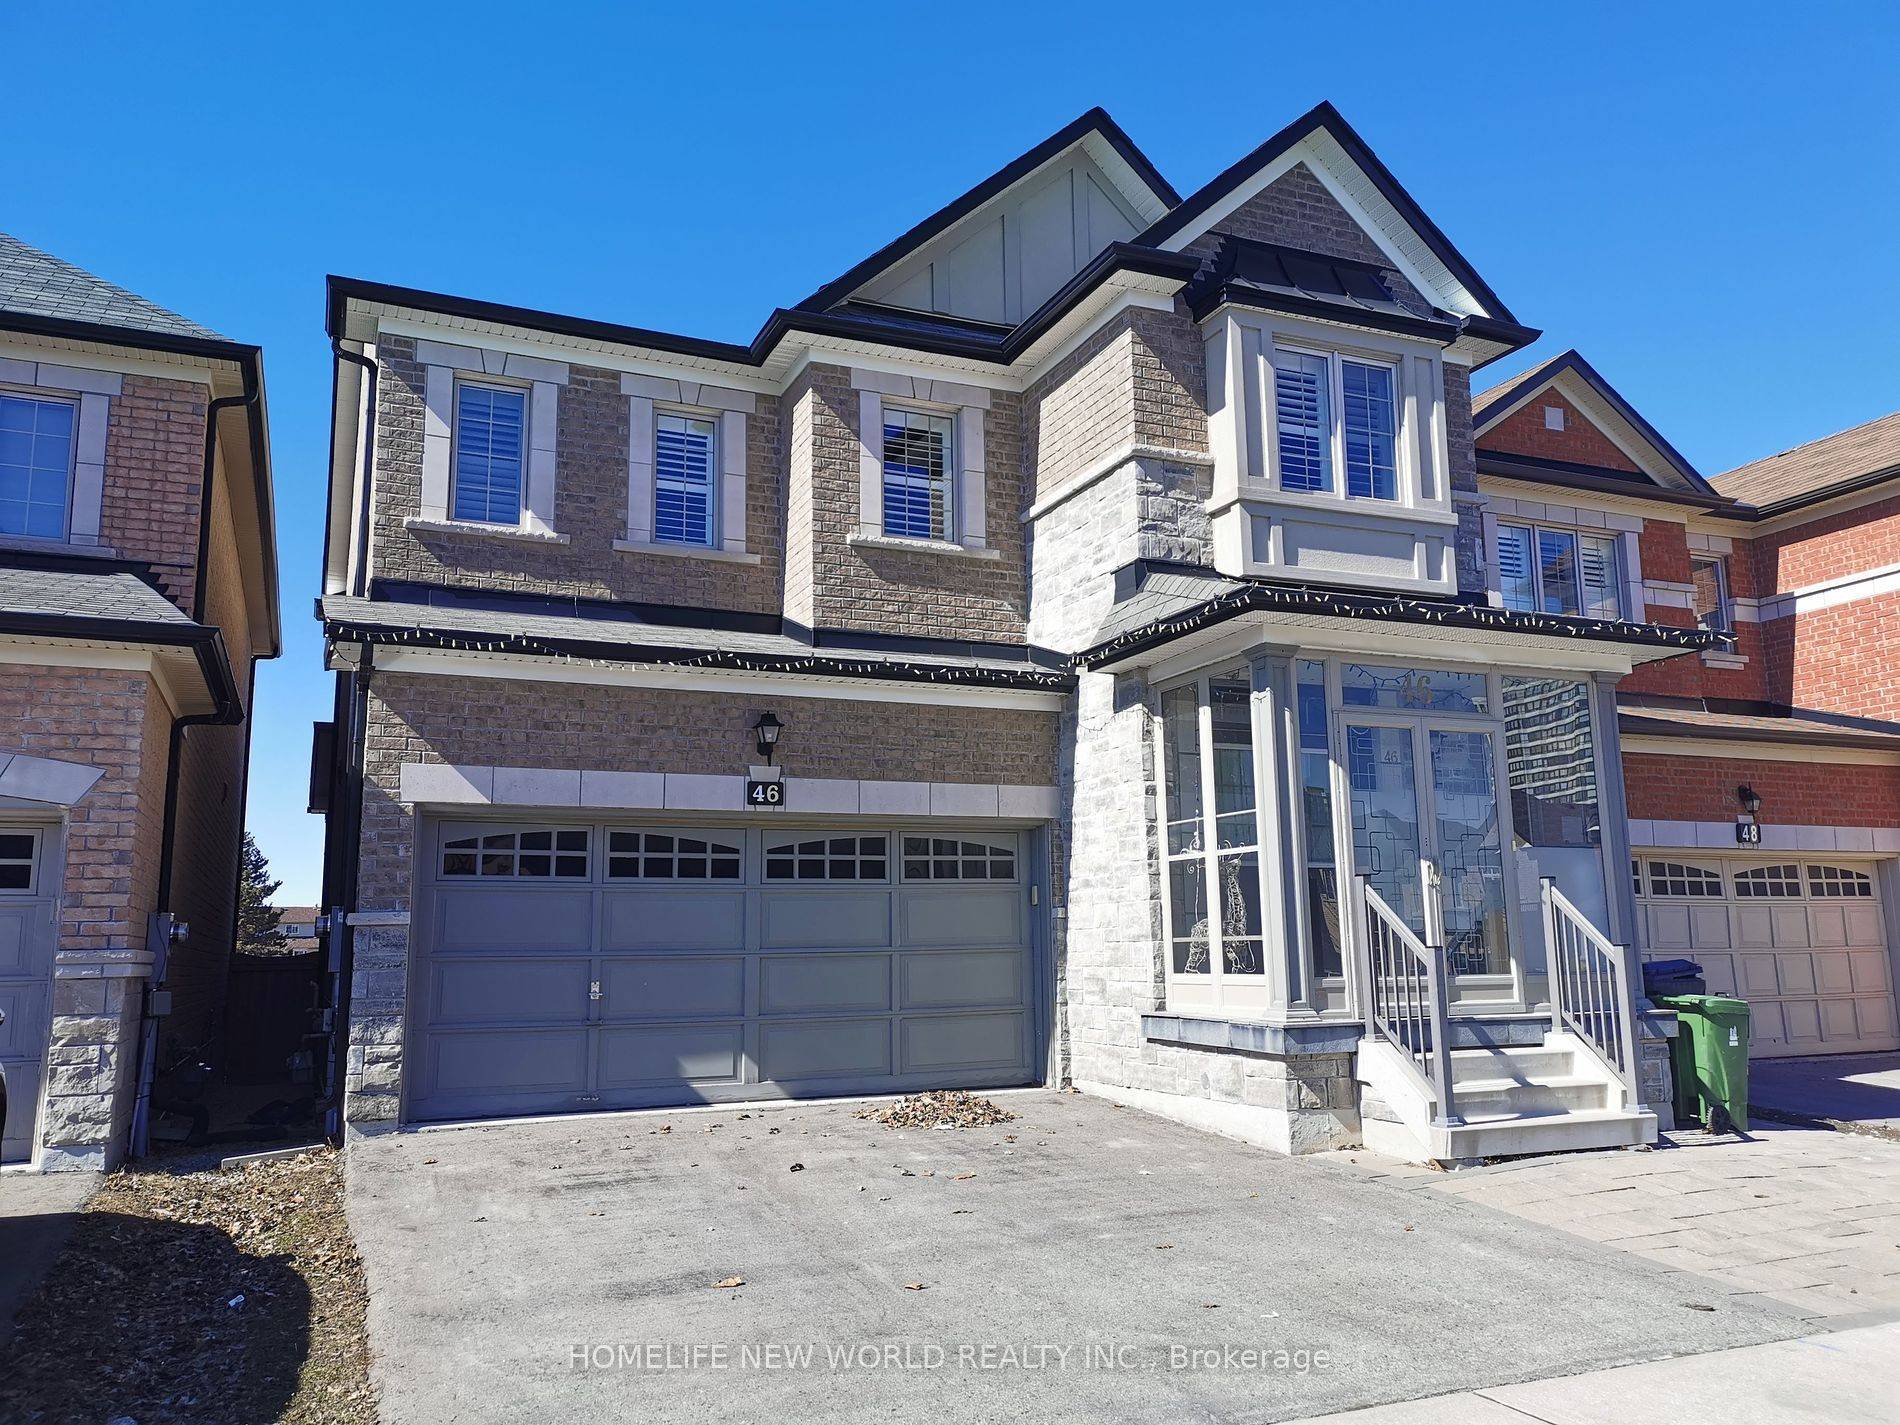 Rarely 10 Years Old Like New Gorgeous 4 Bedroom Detached Home For Lease.